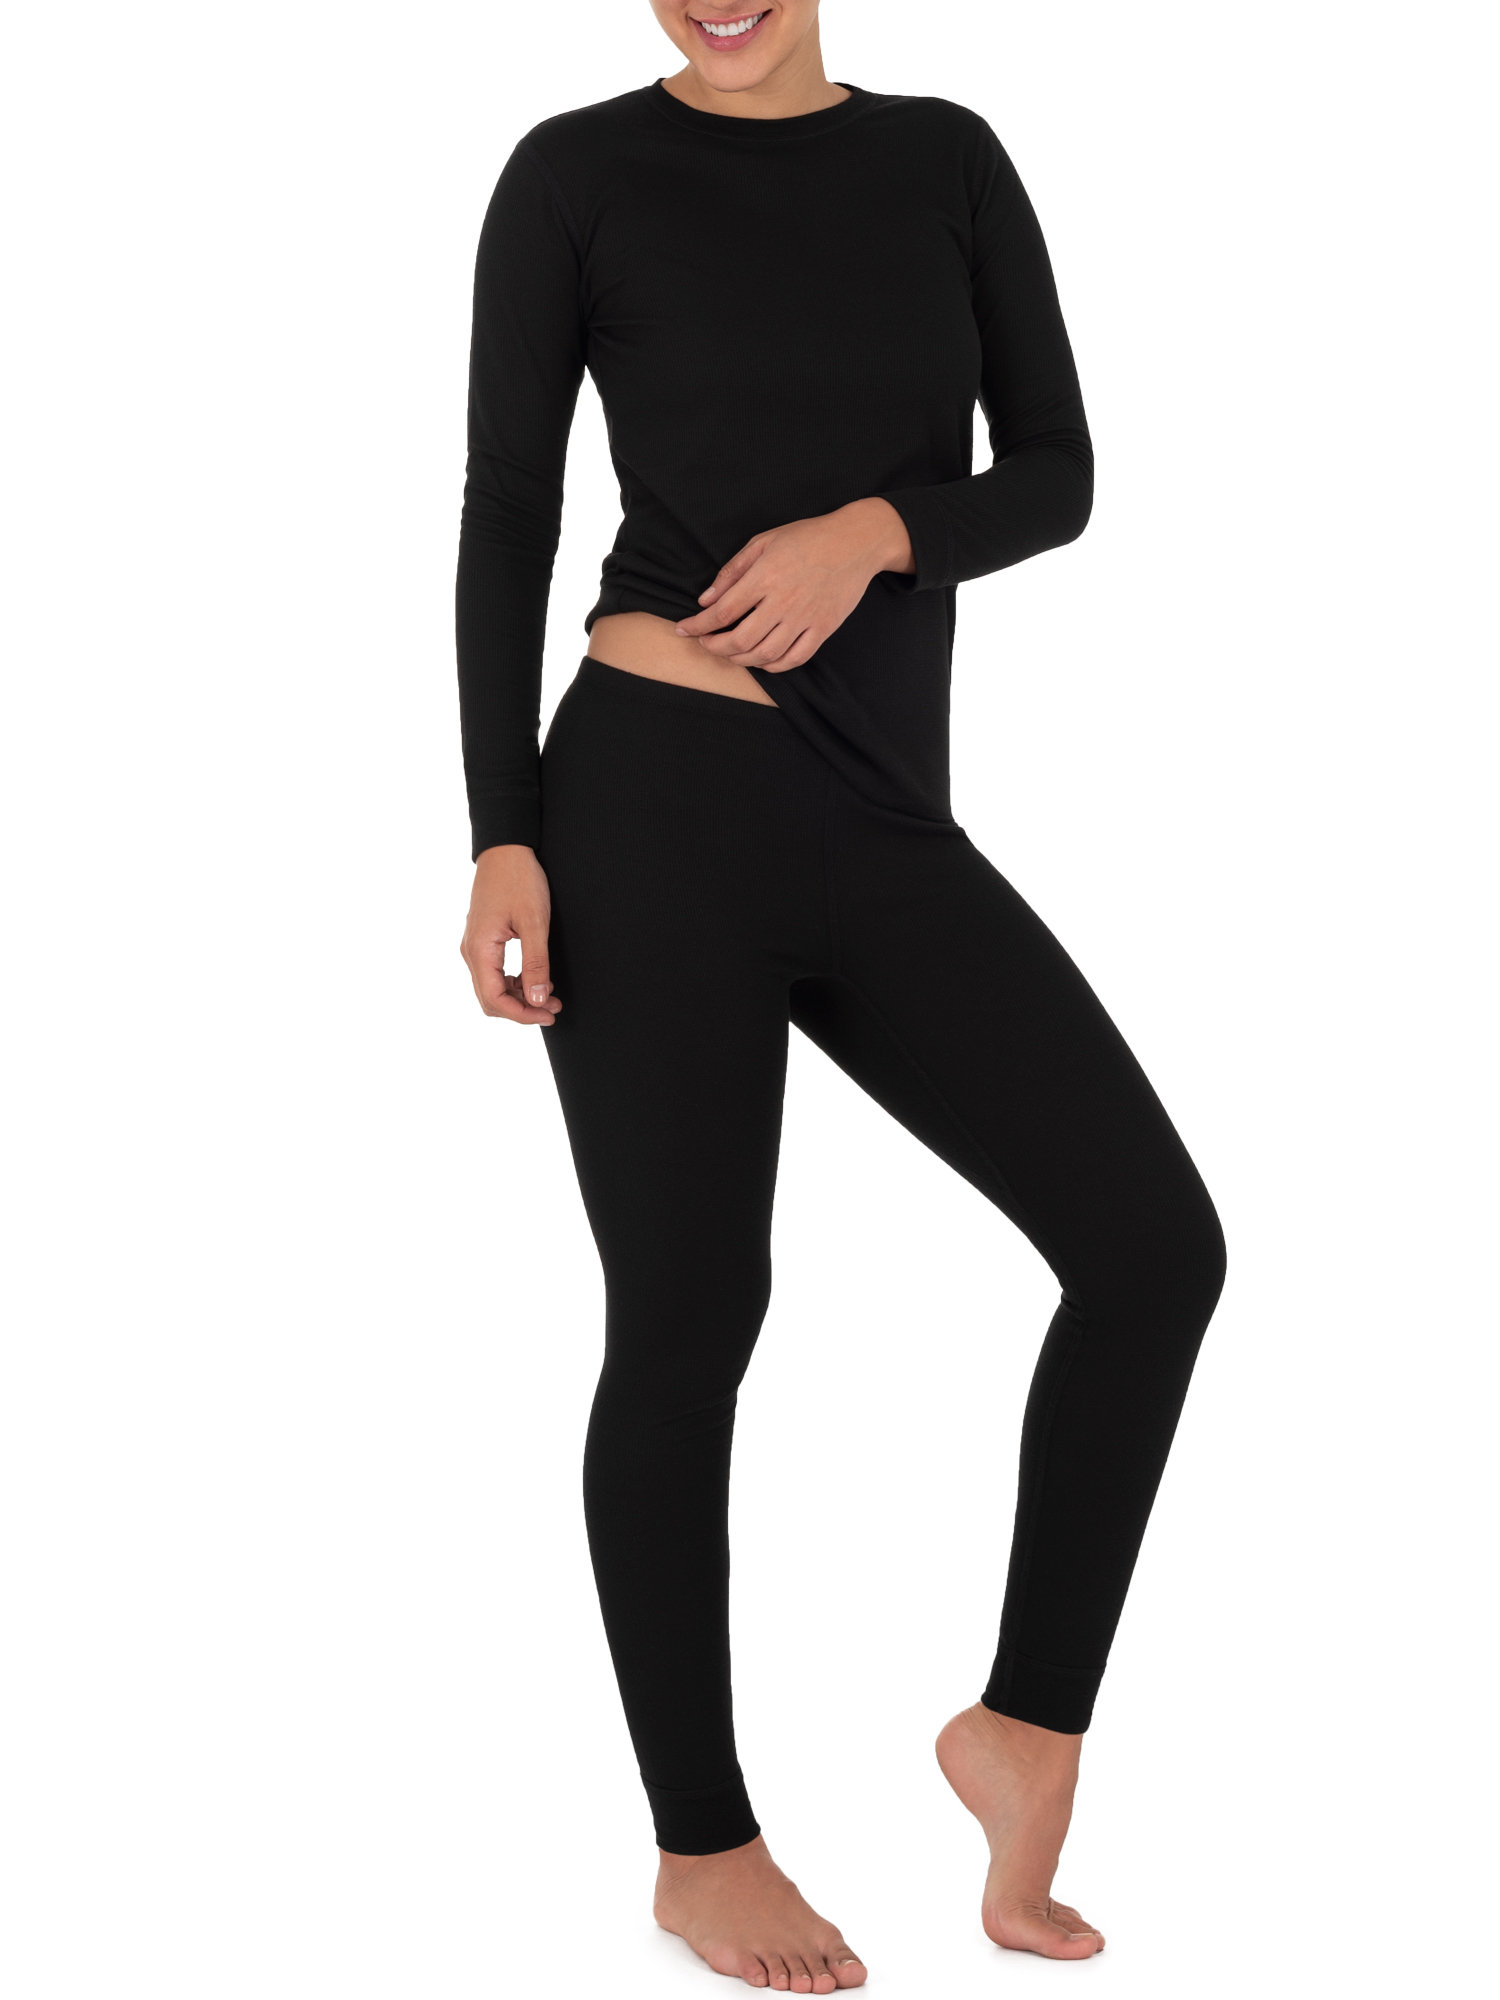 Fruit of the Loom Women's and Women's Plus Long Underwear Thermal Waffle Top and Bottom Set - image 5 of 14